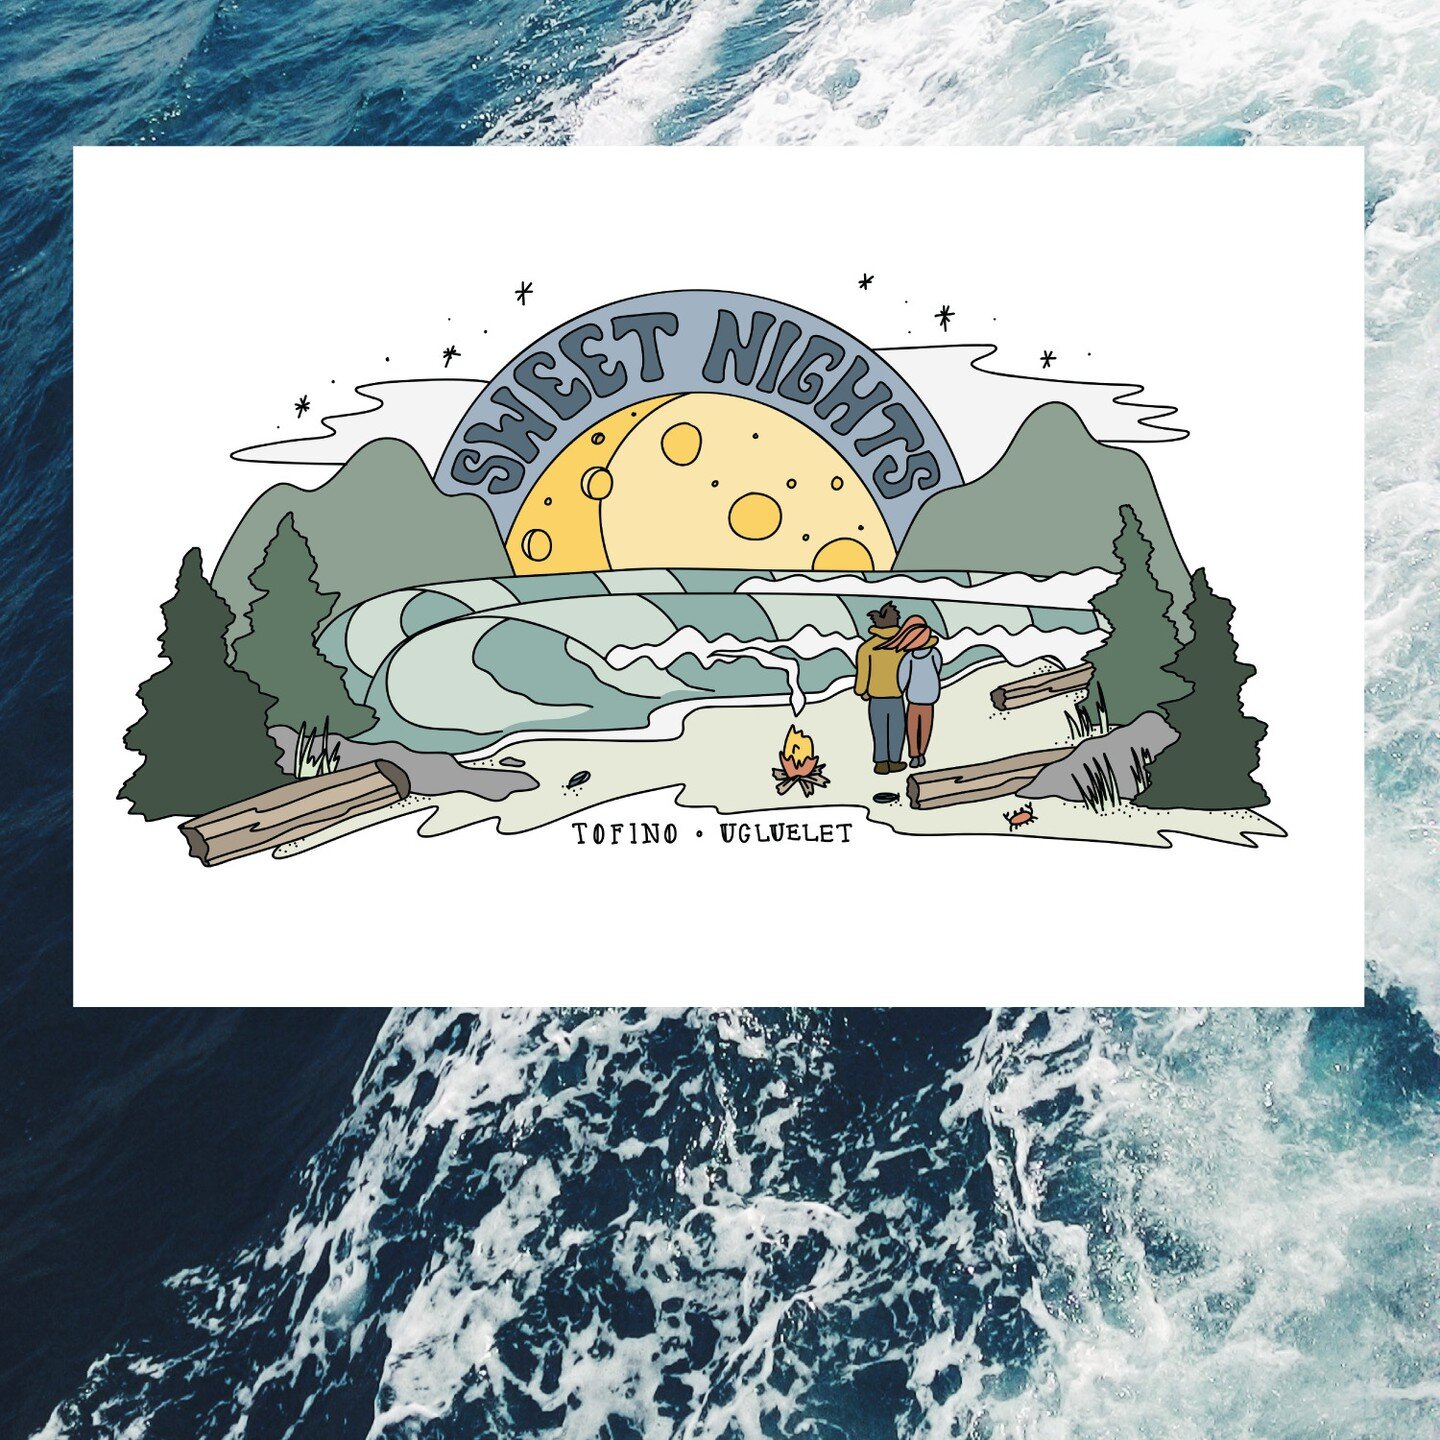 Sweet nights or swell days - Whens your favourite time to hit the beach? 🌞🌛

Illustrations for @selkiescoastalcreations

.
.
.
.
#illustrationartists #illustration #design #graphicdesign #fresco #adobefresco #procreate #westcoast #tofino #sunset #s